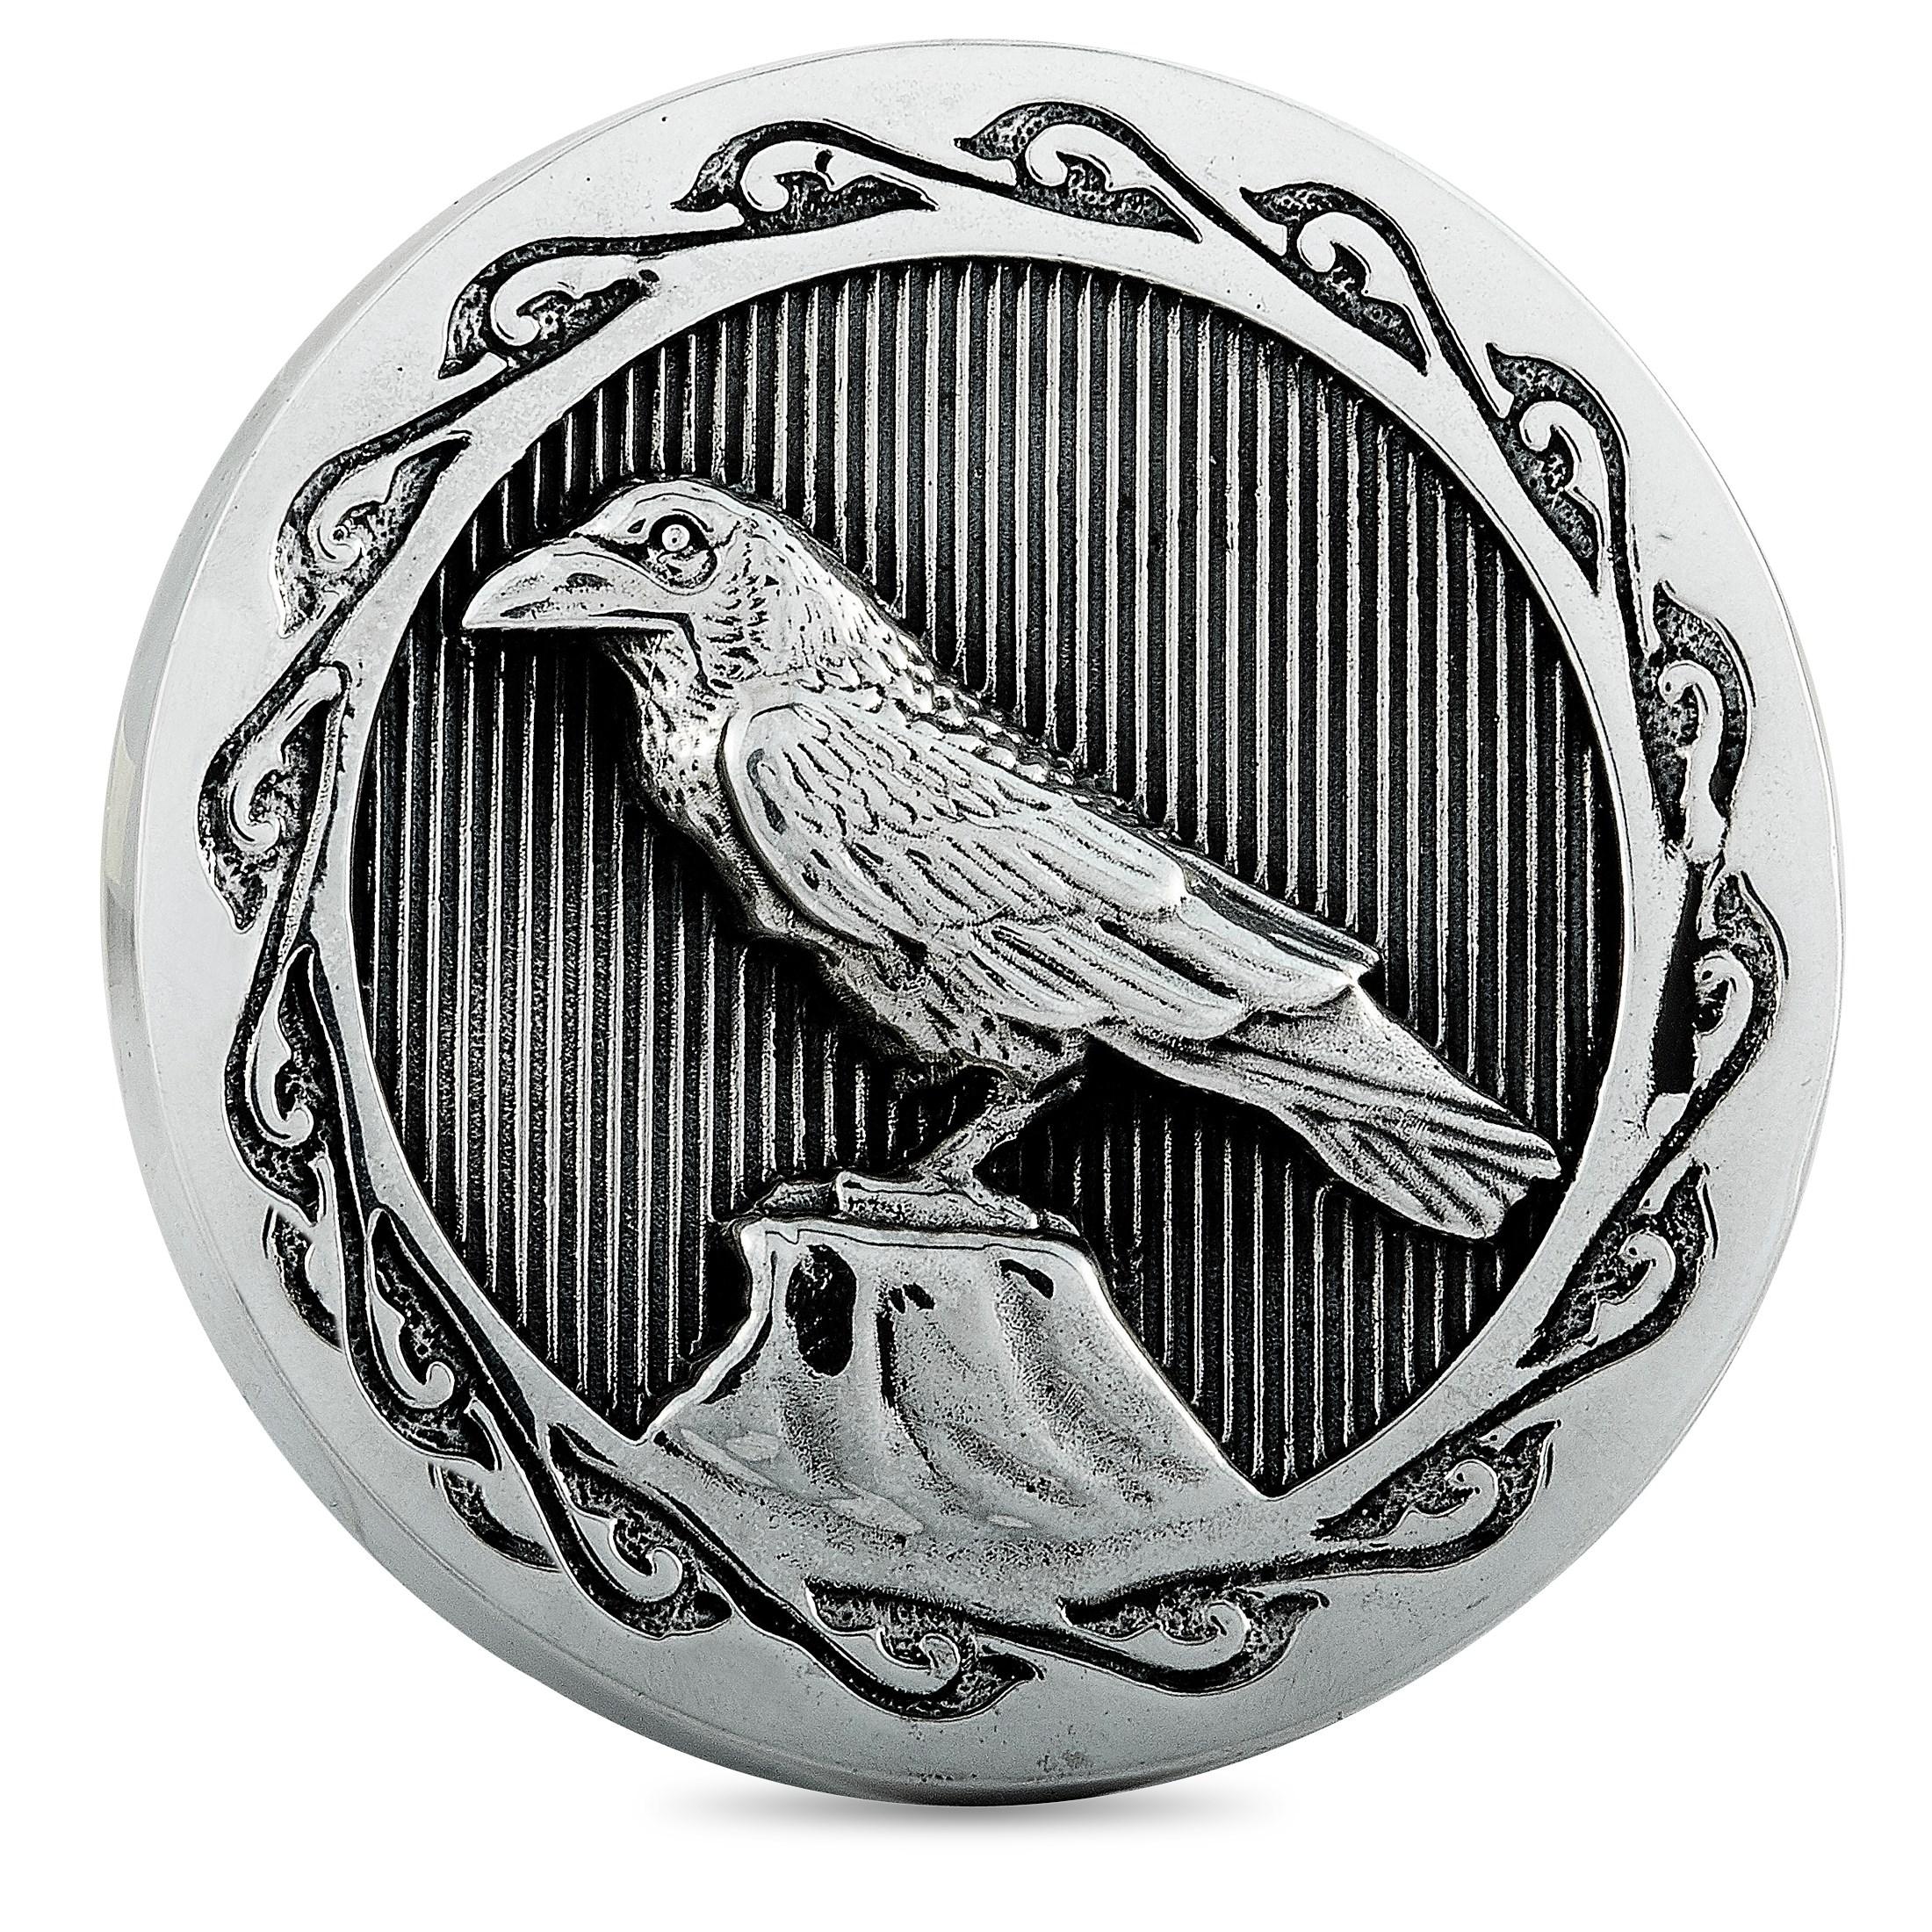 This King Baby stash box is made of wood and boasts a sterling silver lid that features a carving of a bird. The box weighs 118.1 grams and measures 2.50” in diameter with a 1” height.

Offered in brand-new condition, this item includes the